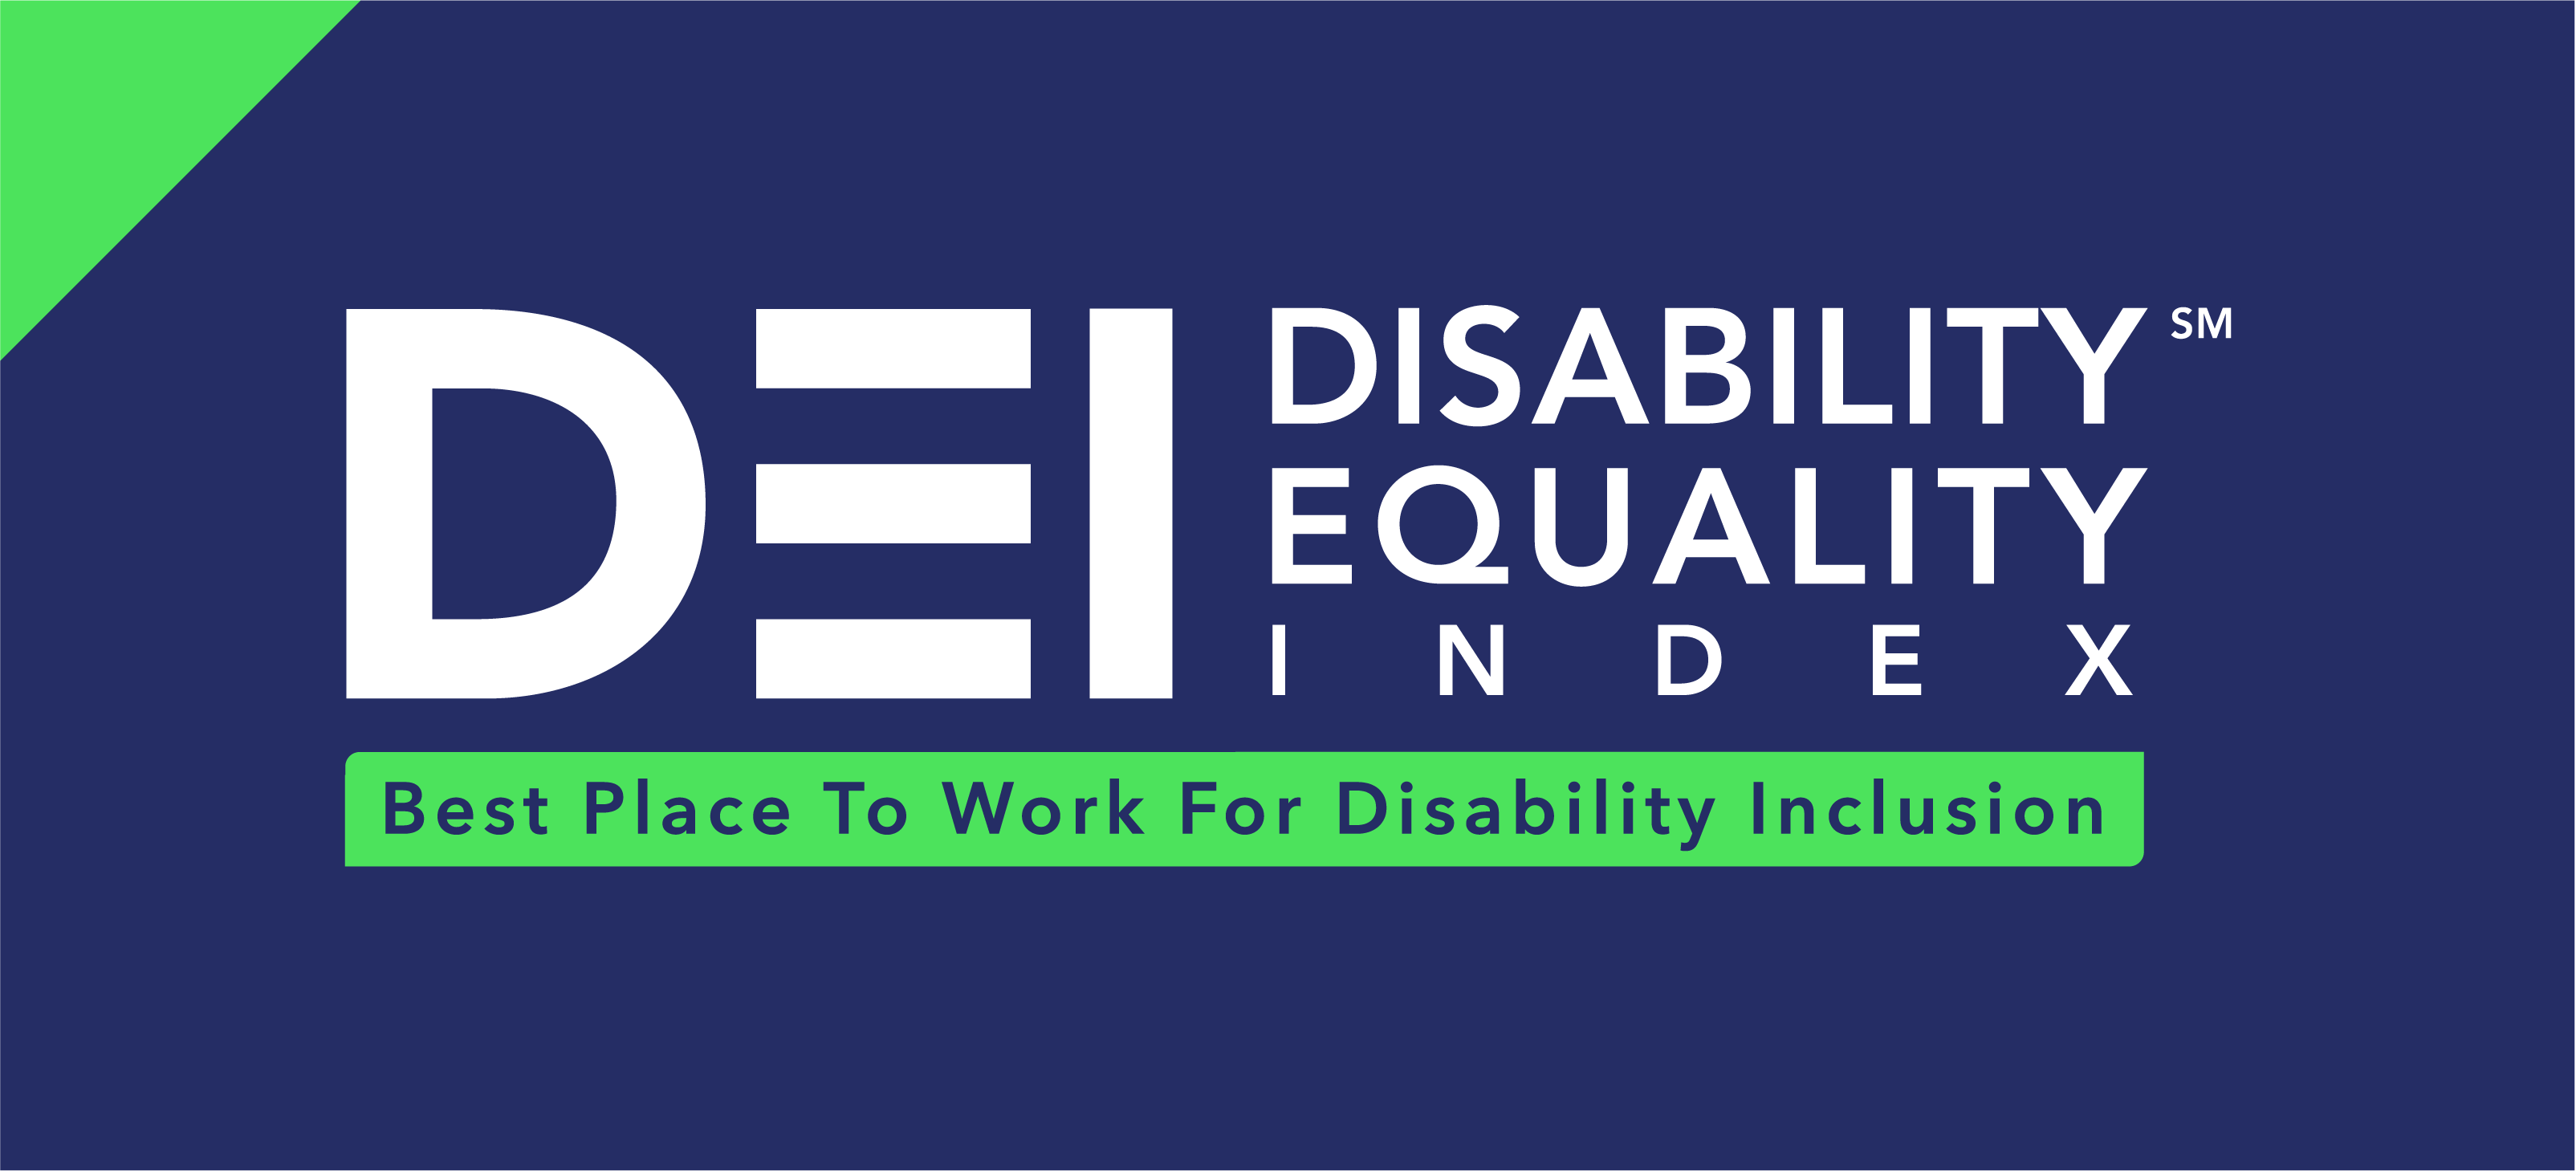 Disability Equality Index reveals 2022 “Best Places to Work for Disability Inclusion”